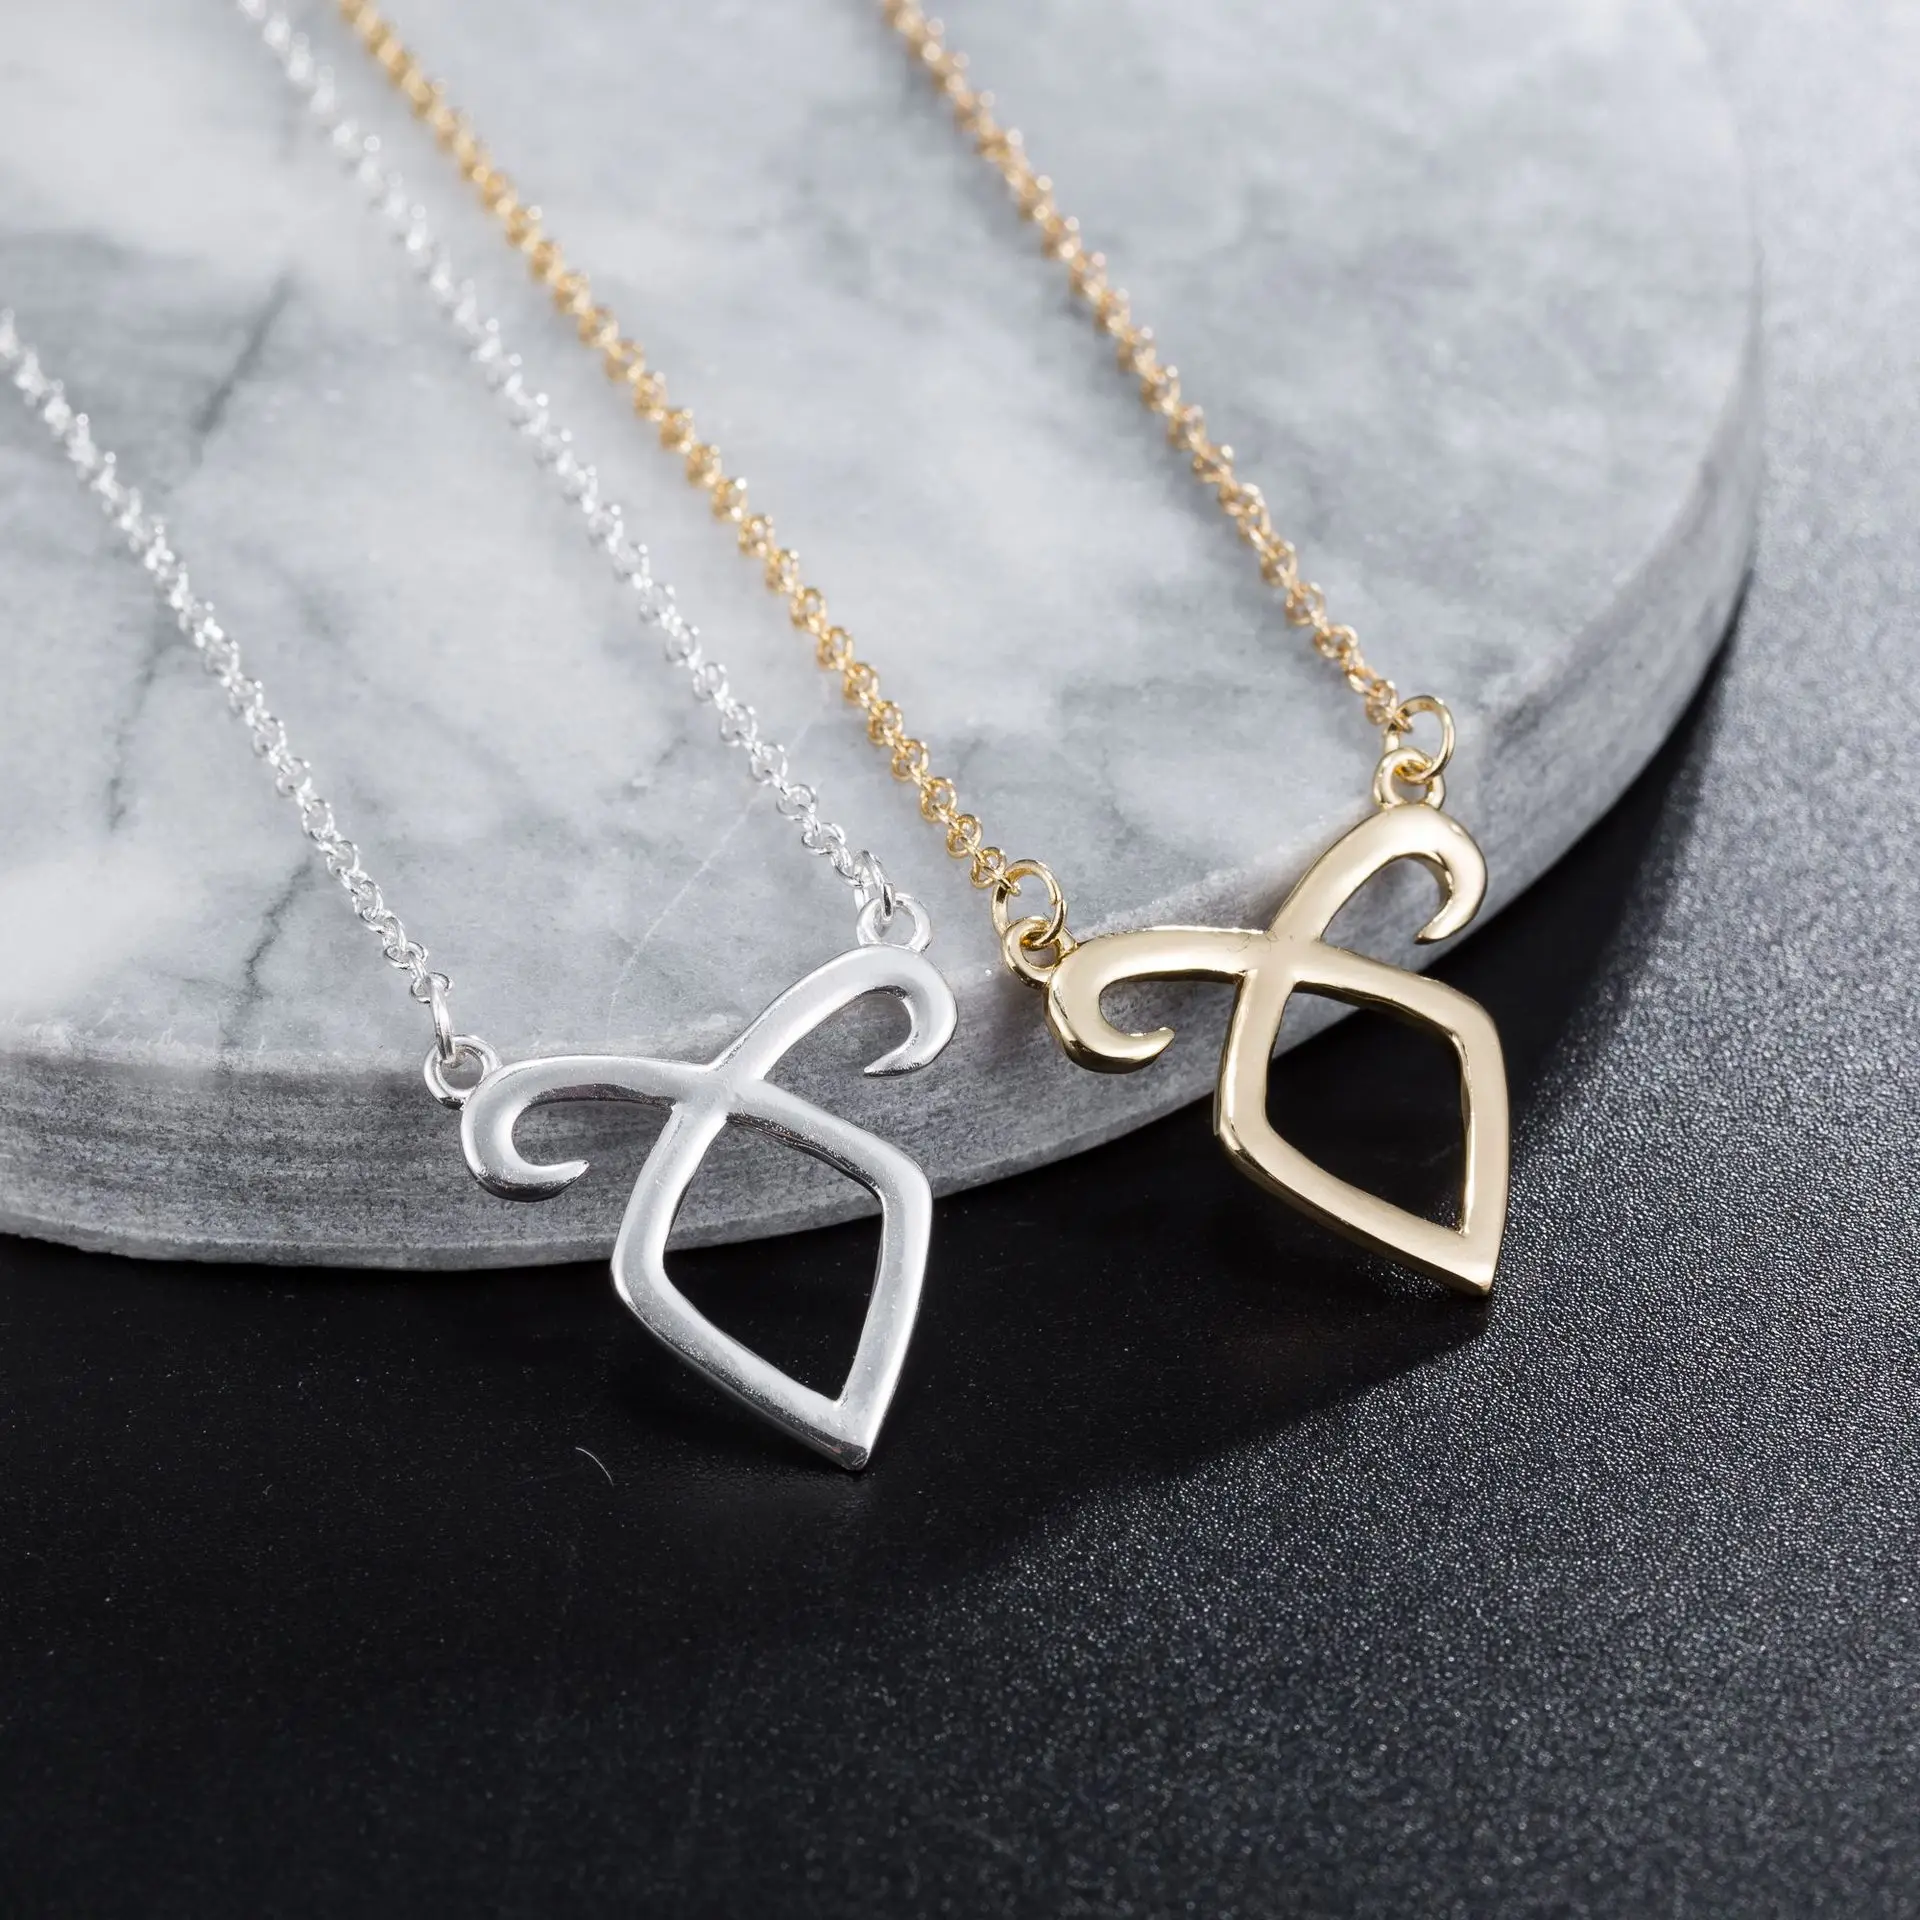 The Immortal Instruments Angelic Power Rune Pendant Necklace